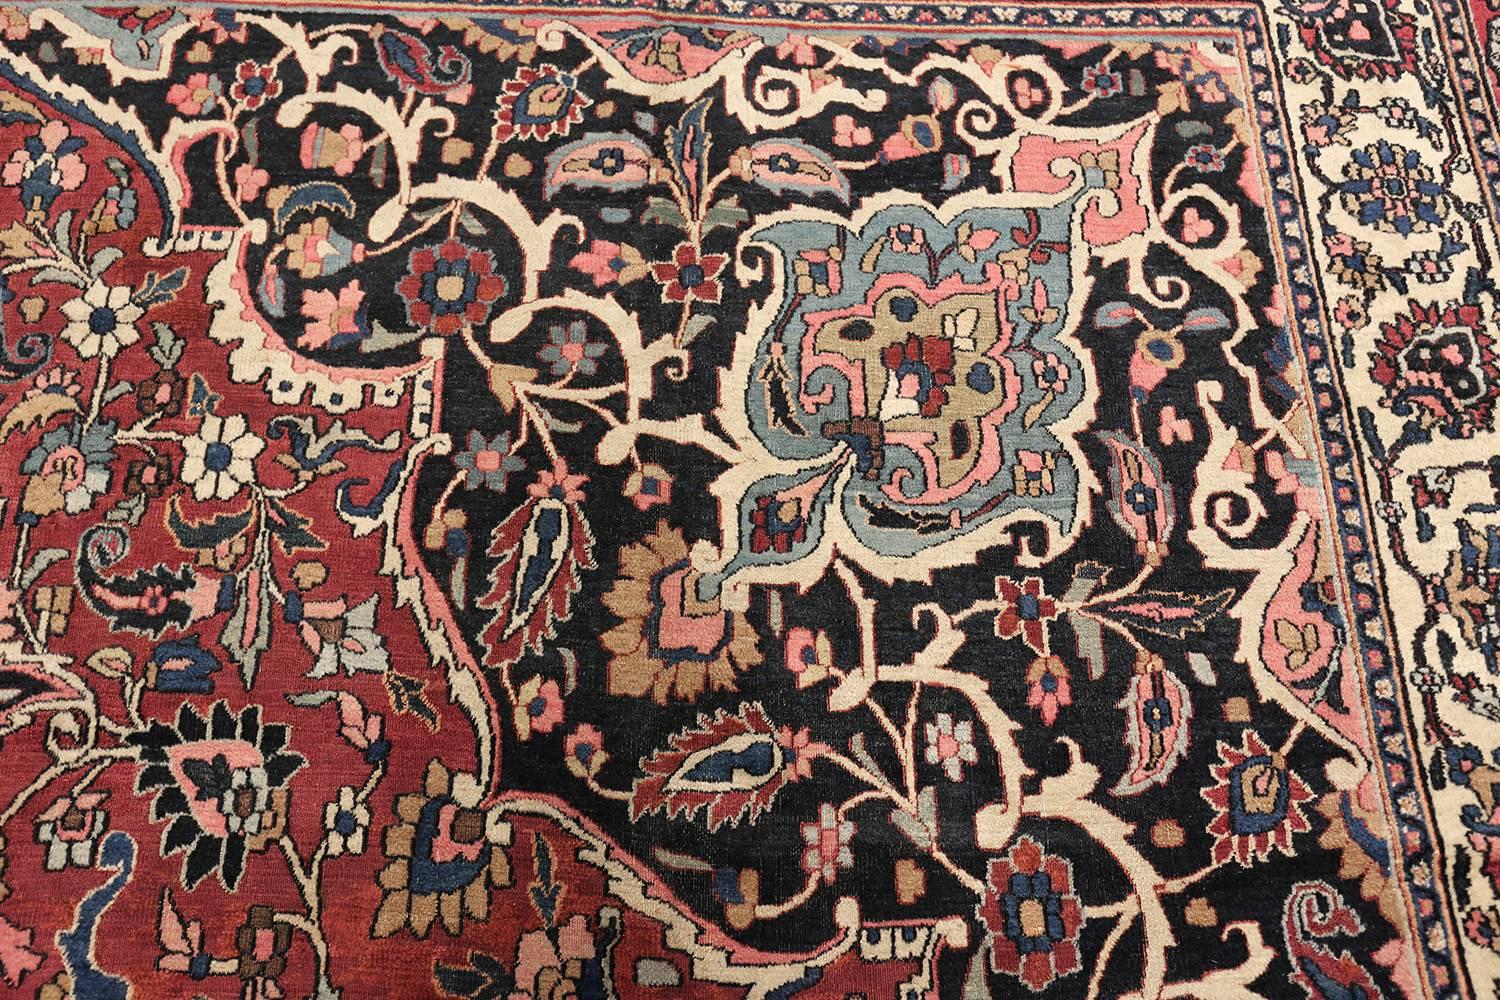 Hand-Knotted Oversized Fine Antique Persian Khorassan Mashad Rug. Size: 15 ft 6 in x 20 ft 